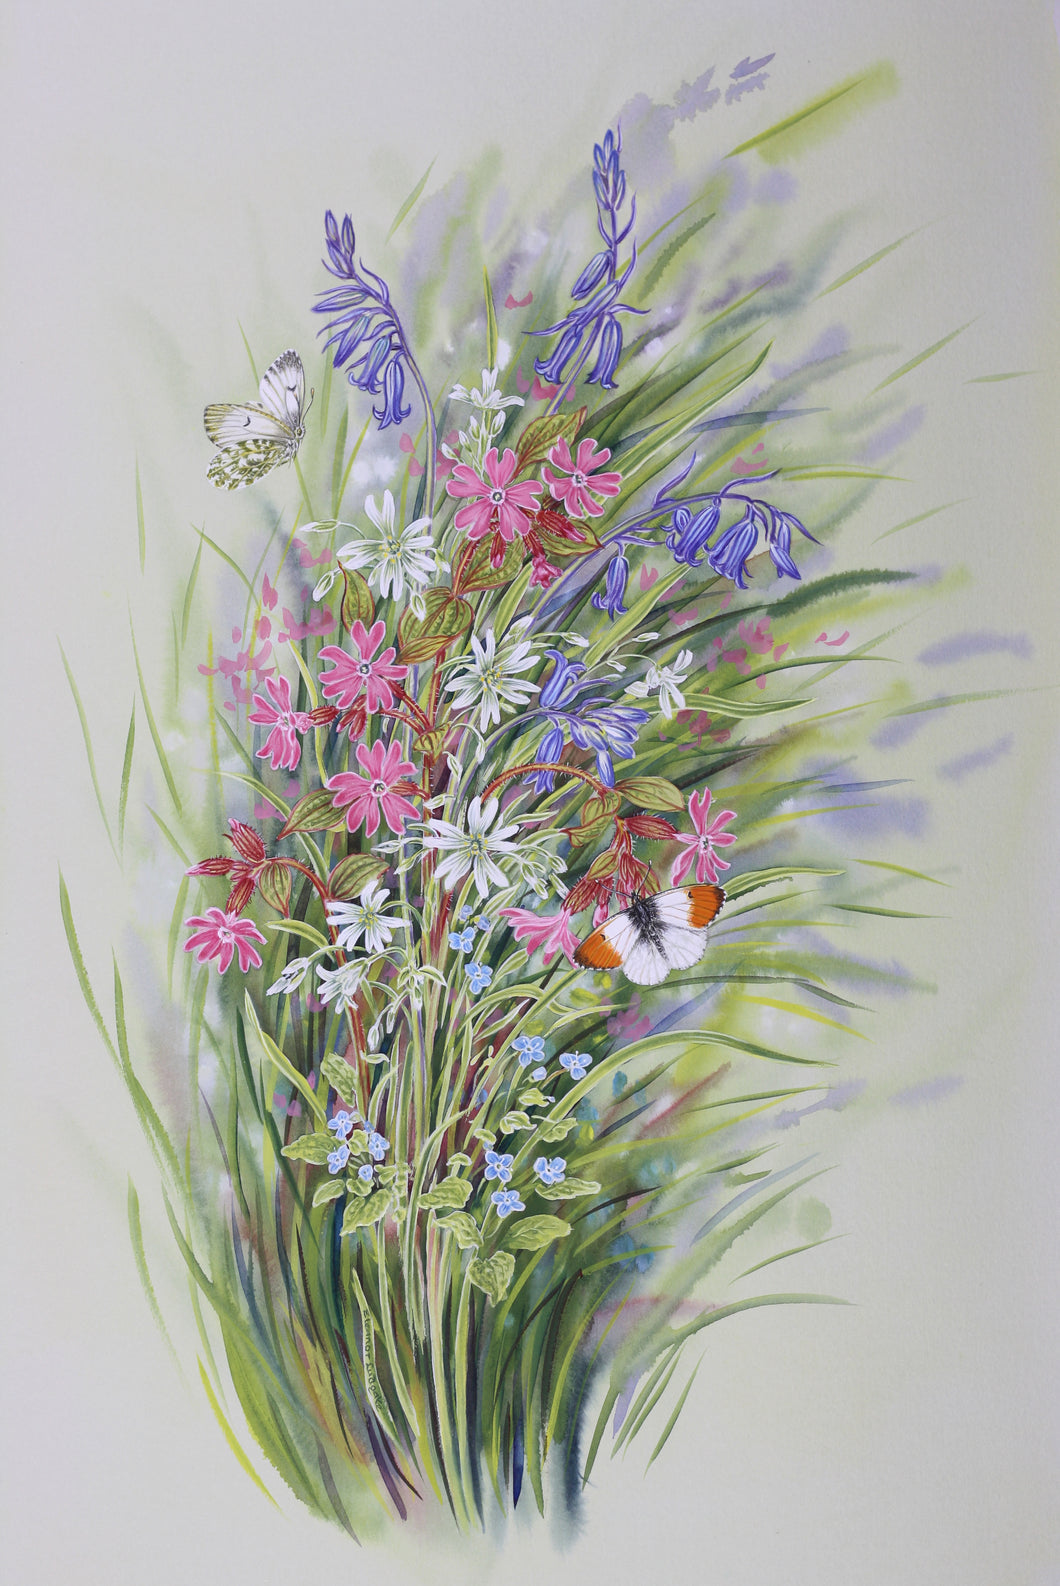 Orange Tips with Spring Flowers print